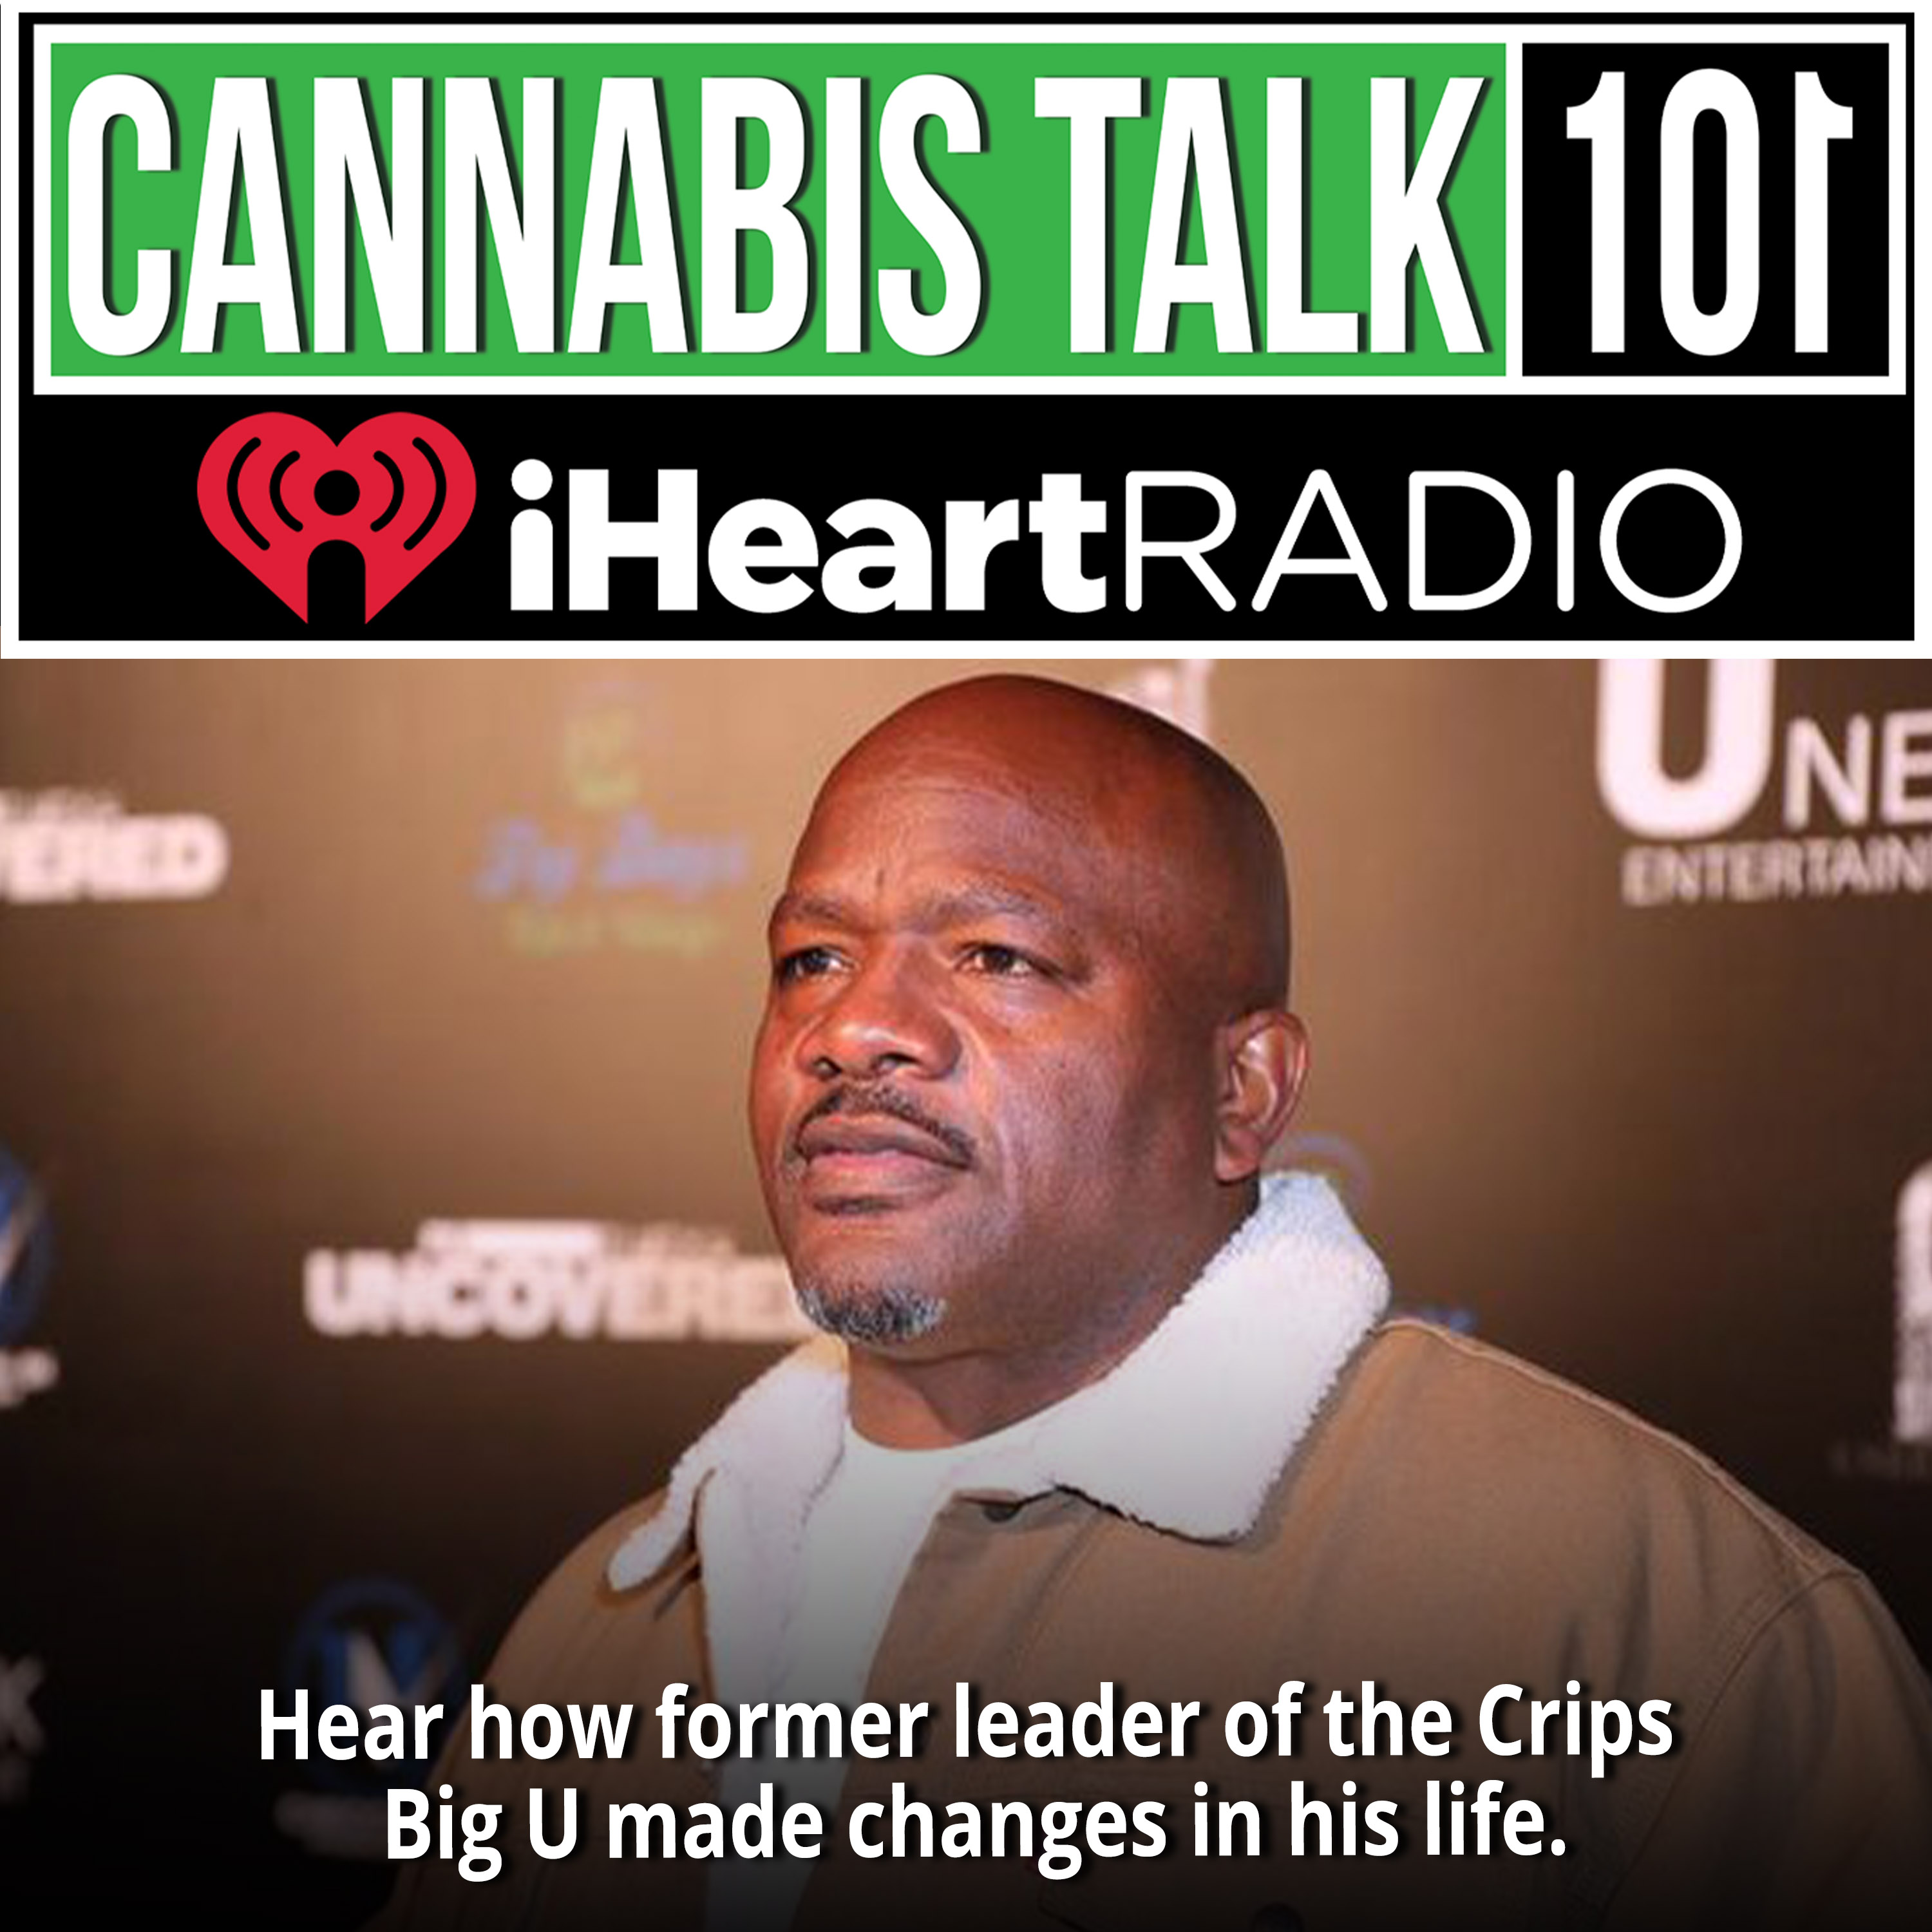 Hear how former leader of the Crips Big U made changes in his life.